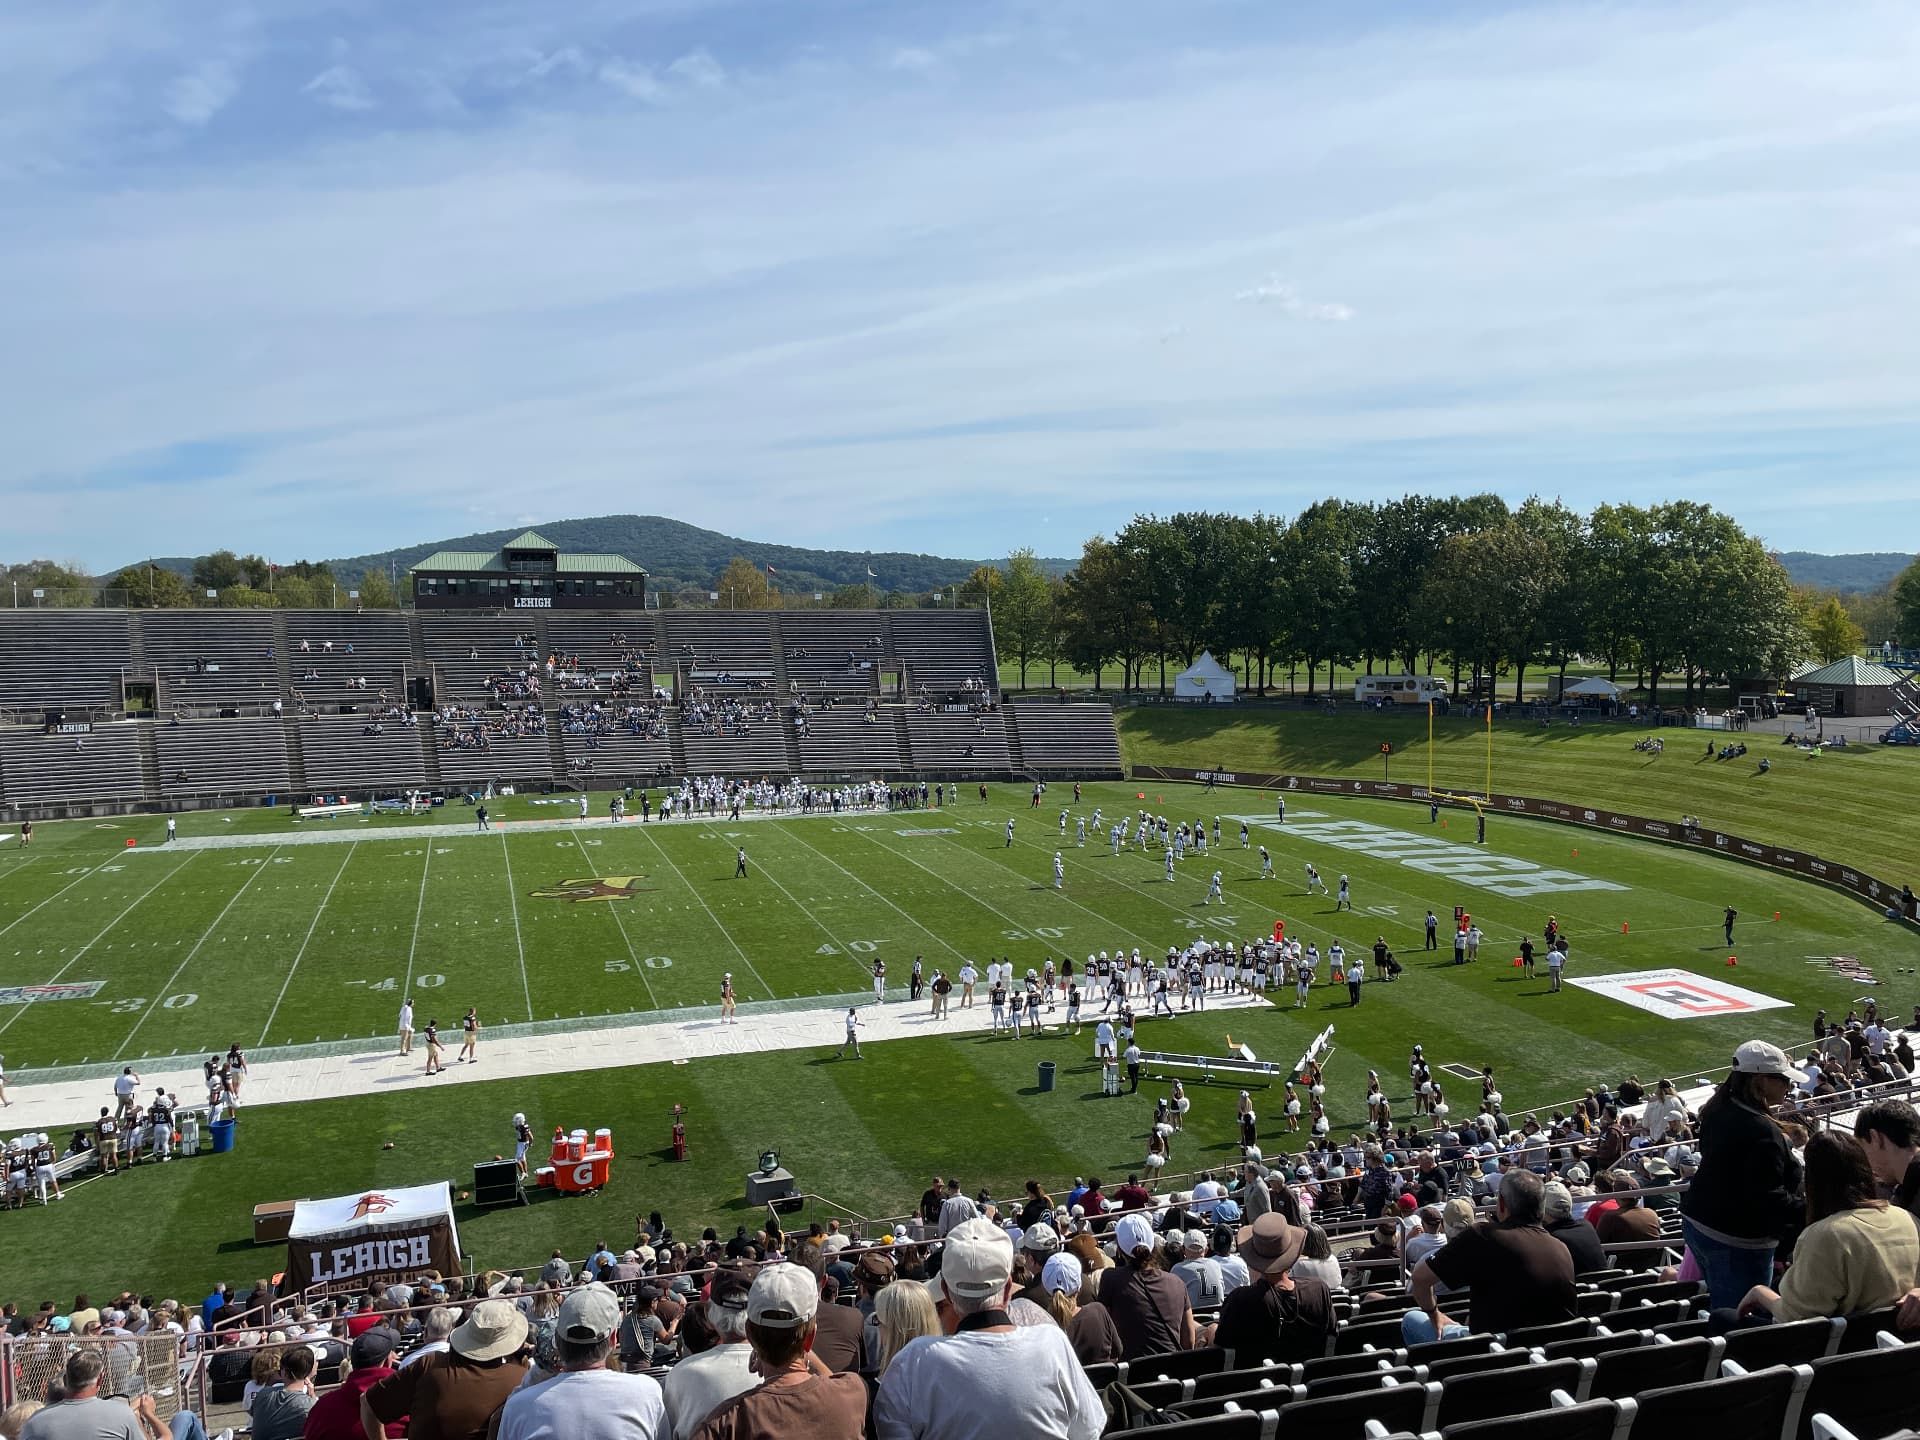 The Lehigh University football team taking the snap deep in their own zone